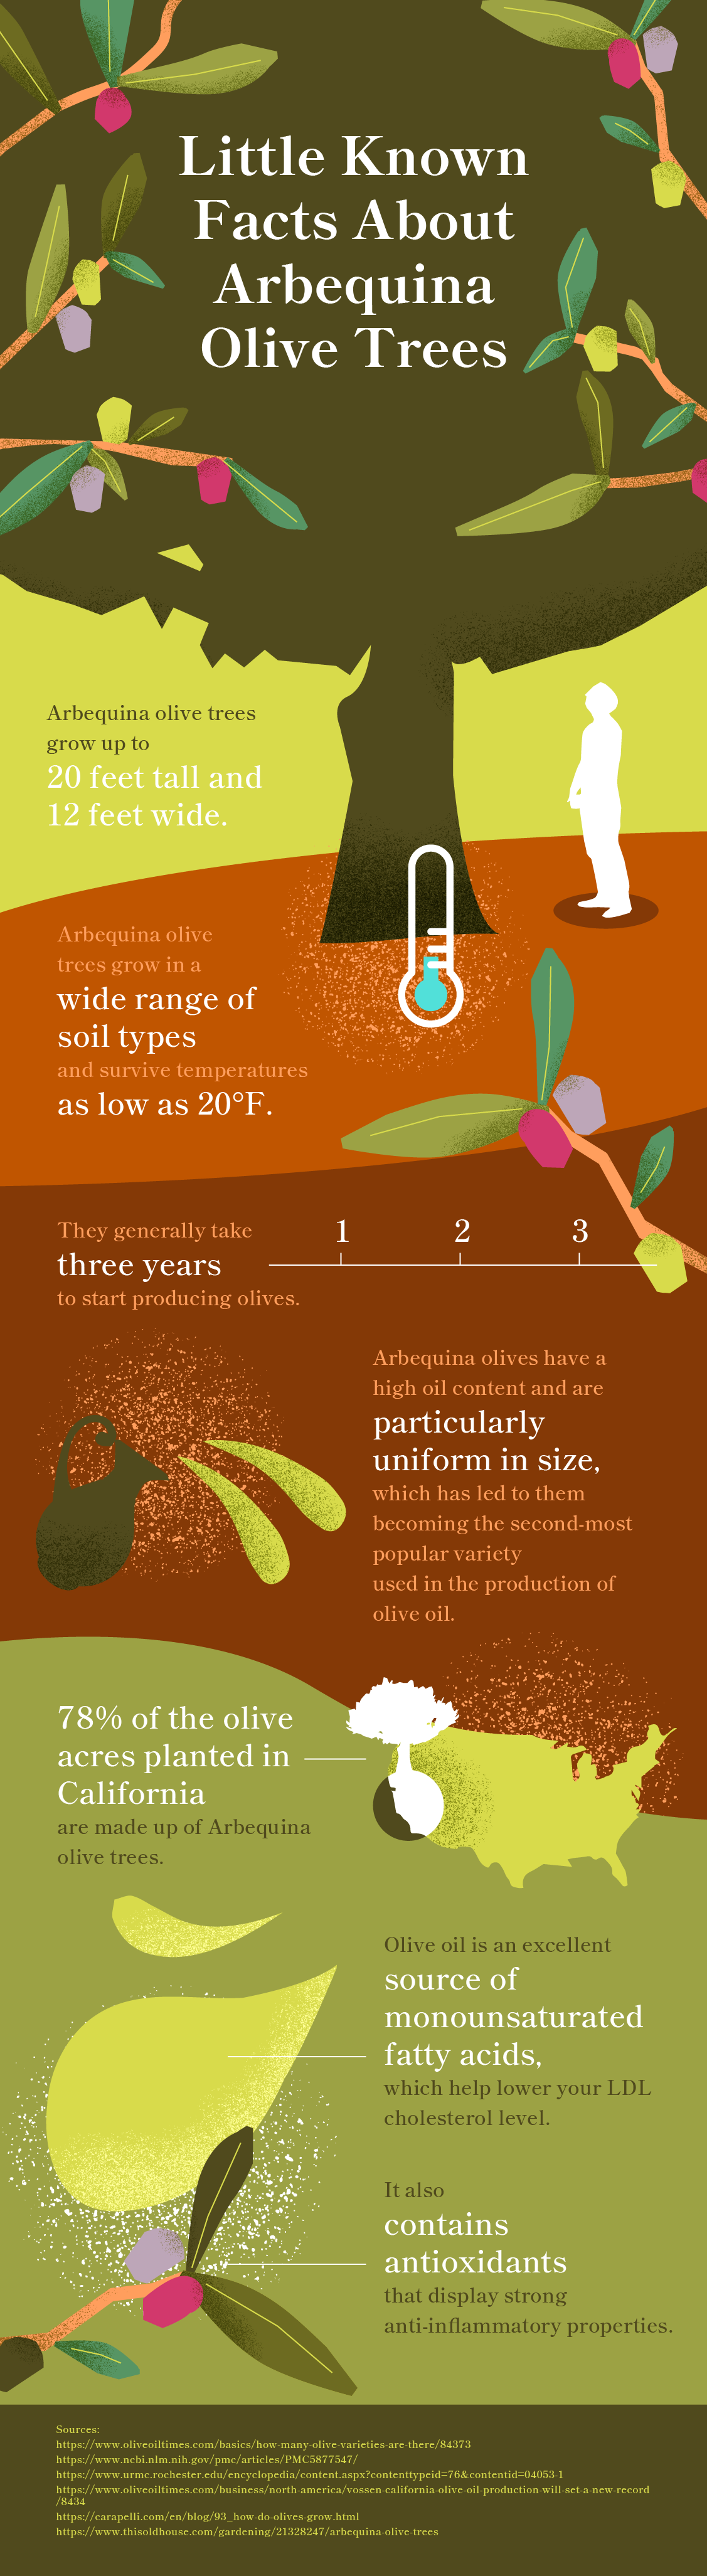 Arbequina Olive Tree Infographic